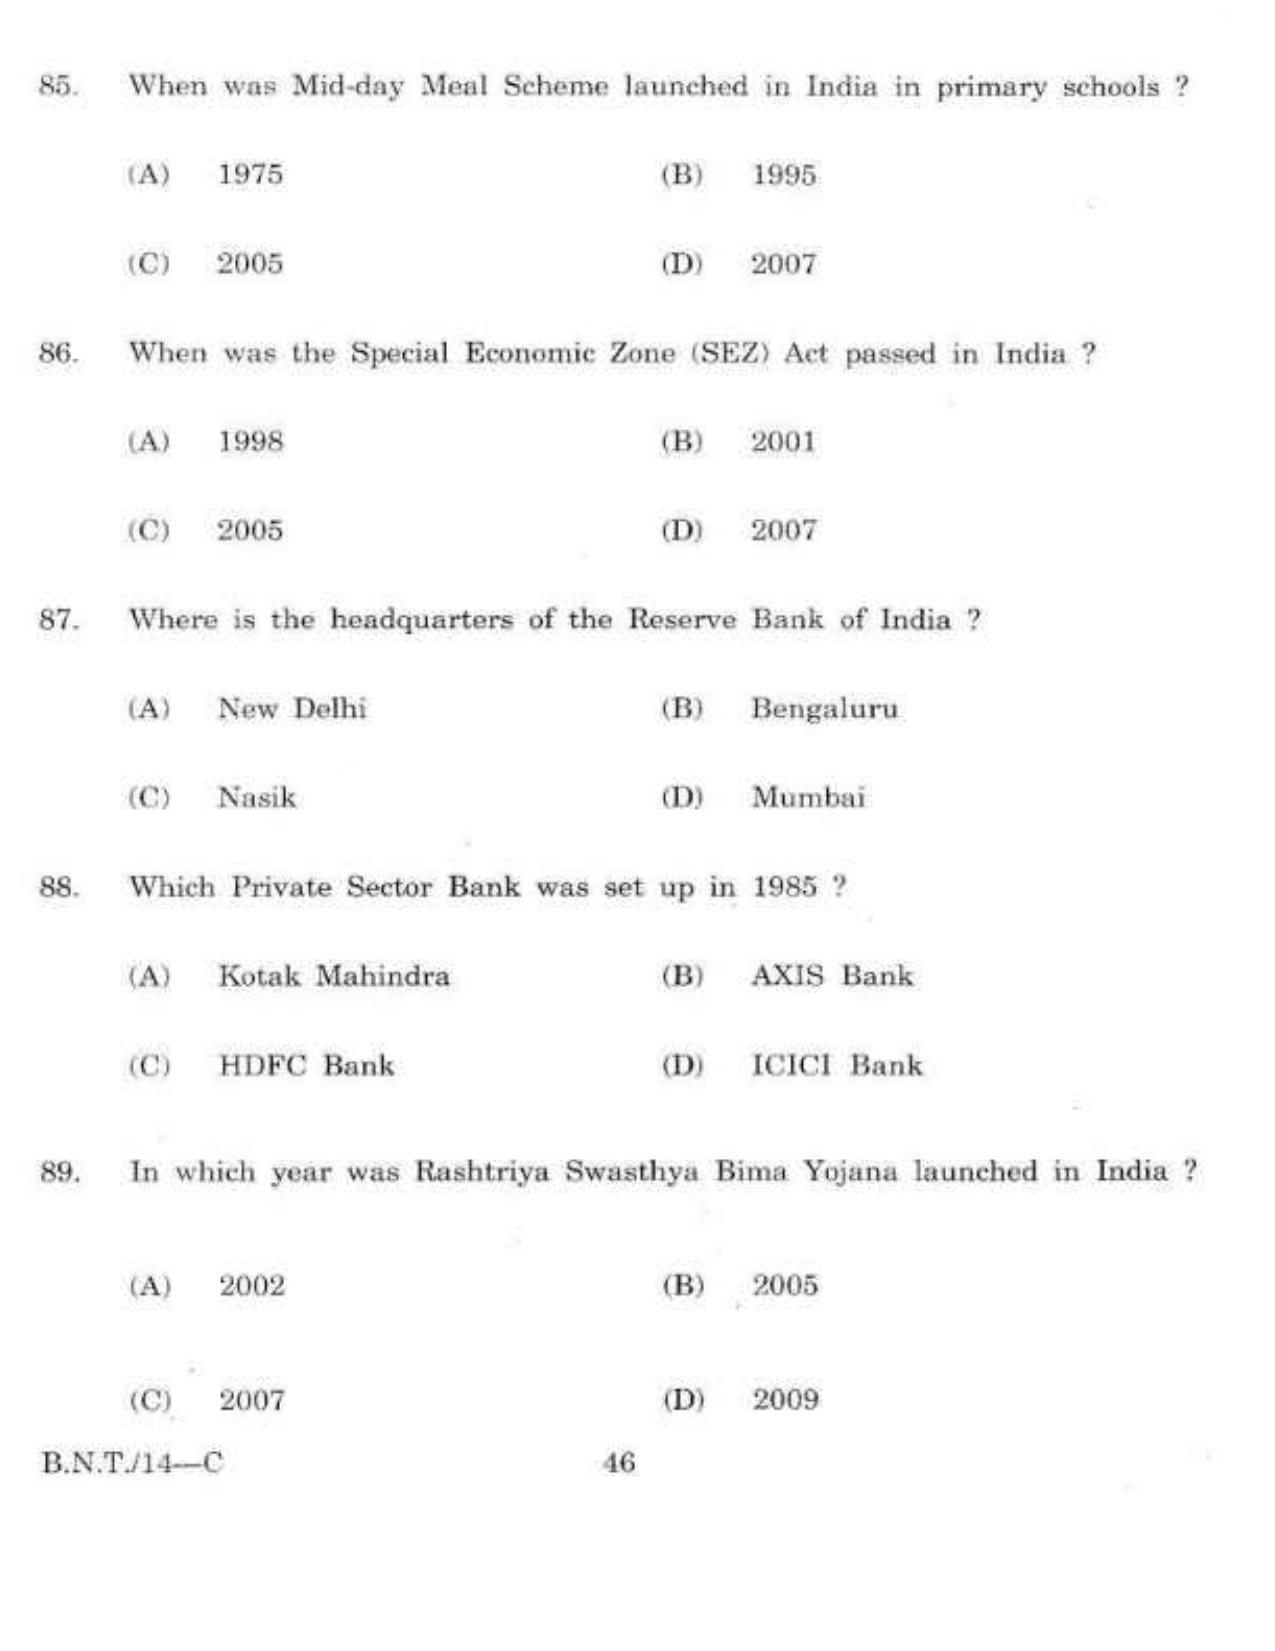 BSMFC Recovery Agent Old Question Papers for General Knowledge - Page 46